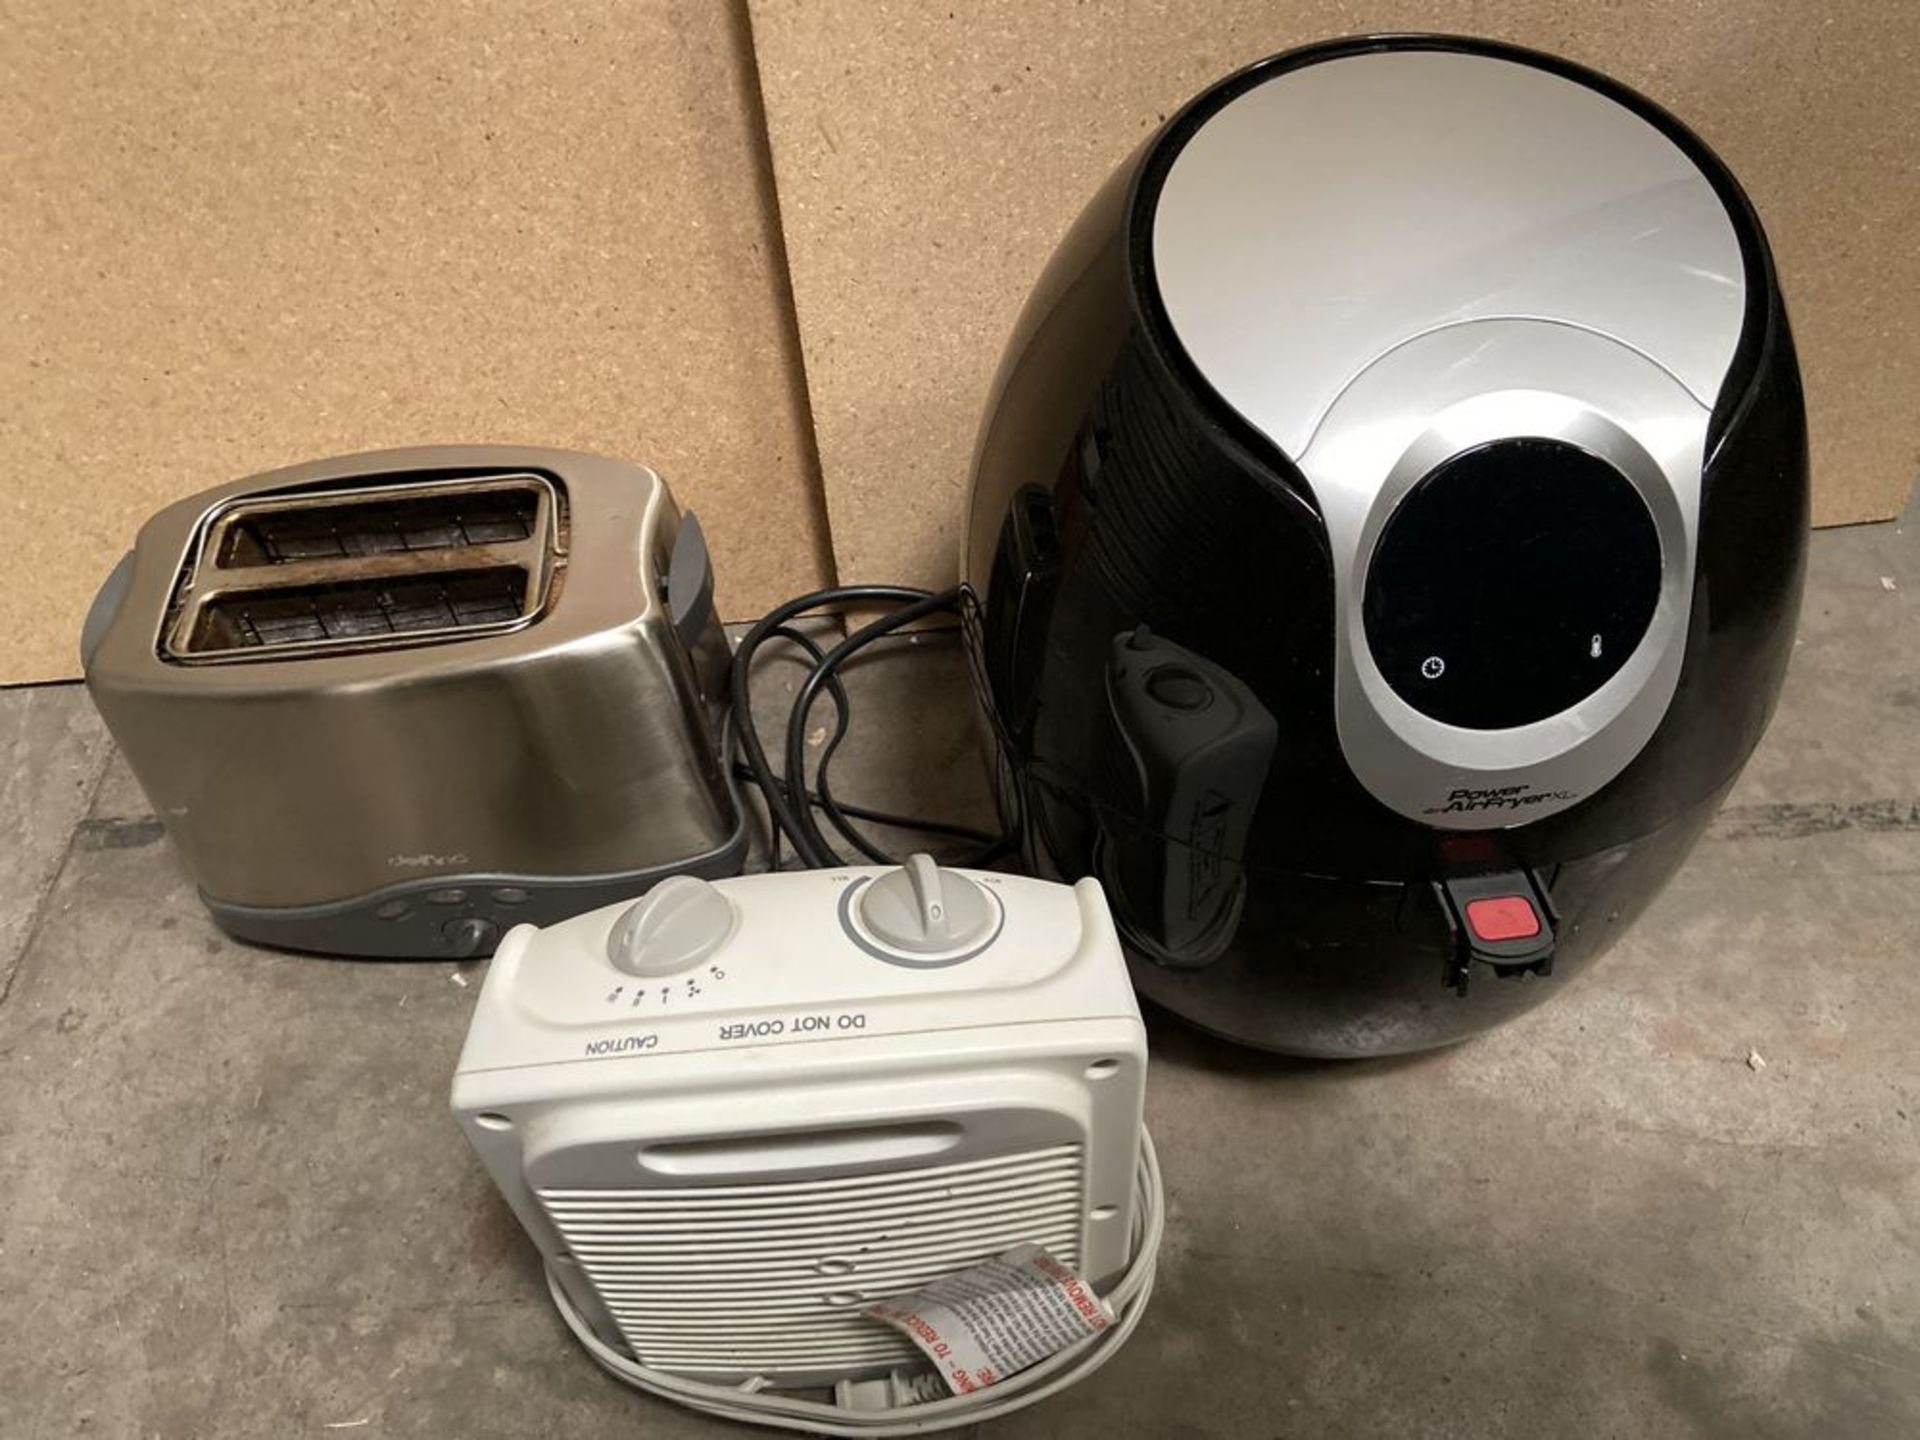 Mixed lot of Home appliances, Air Flier, Toaster and Space Heater - Image 2 of 5